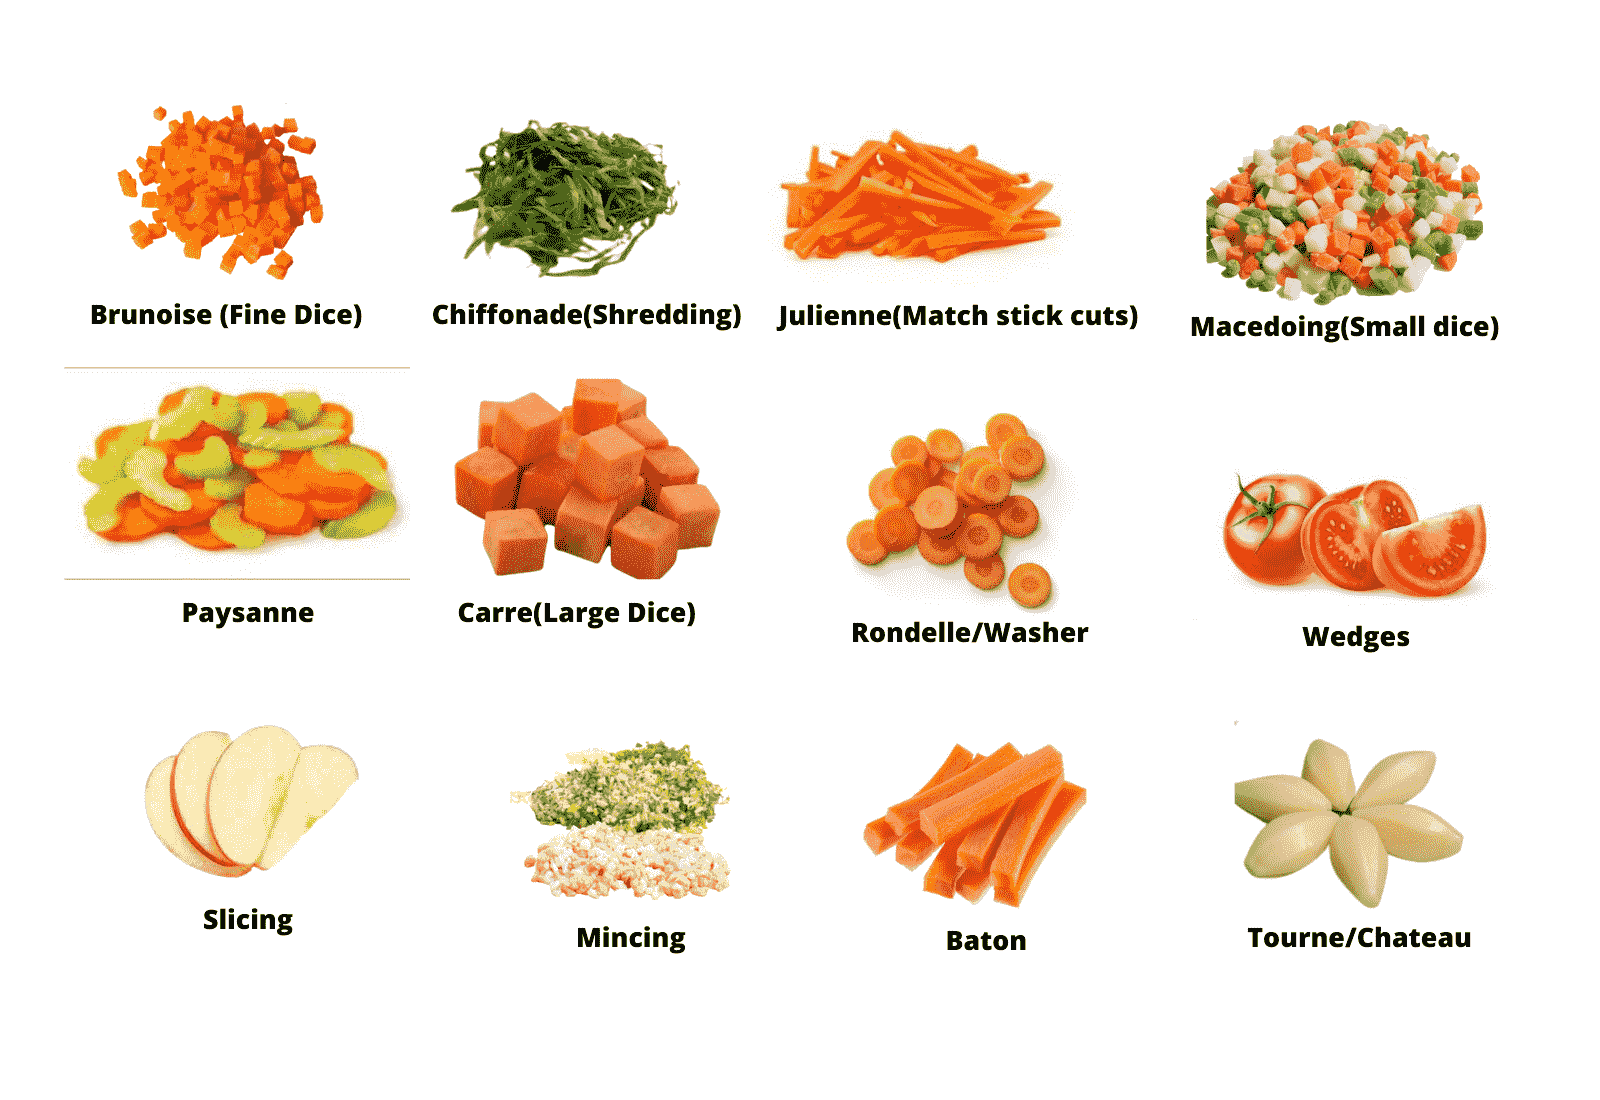 14 basic cuts of vegetables with sizes - food and beverage service